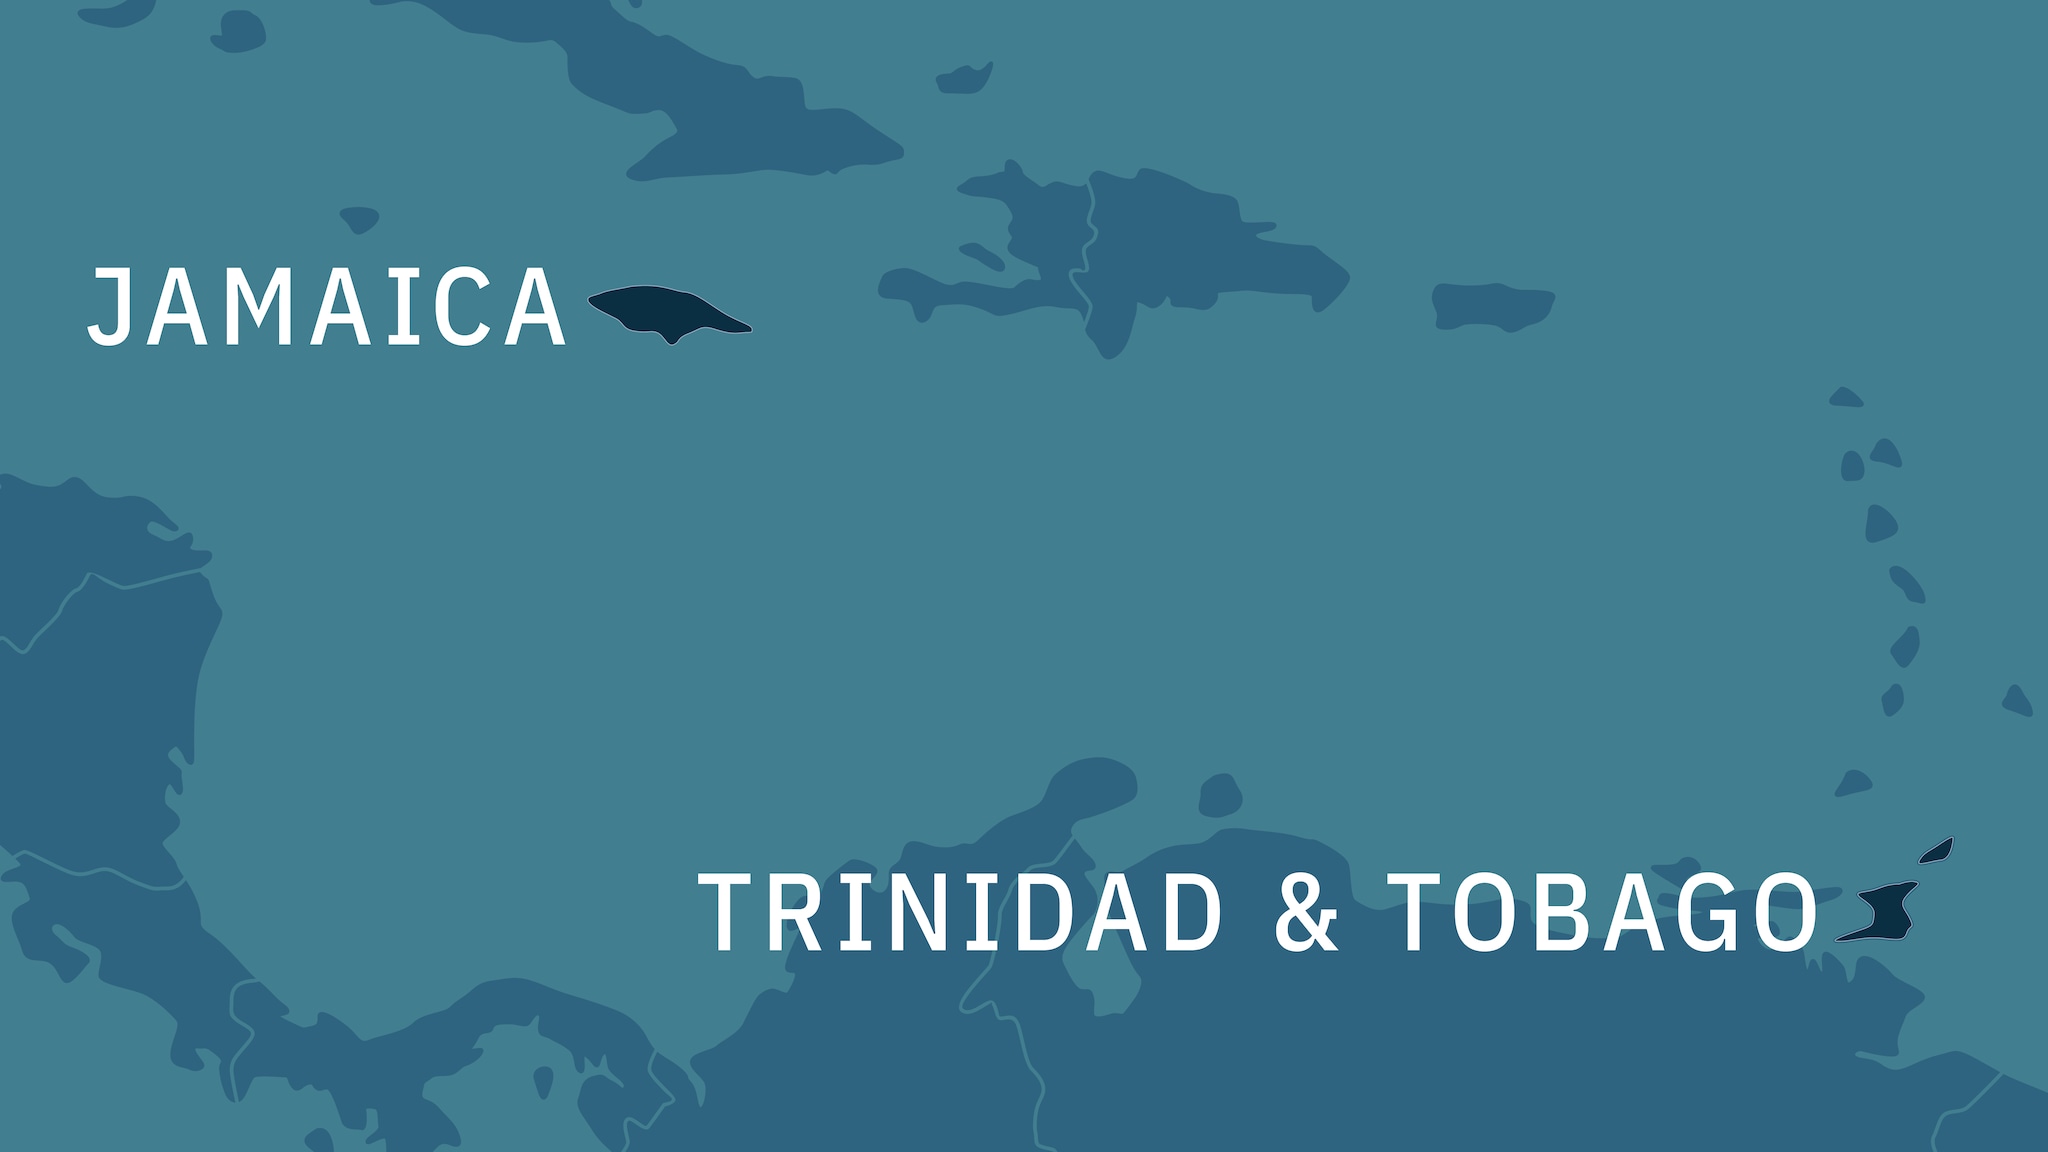 Map of Caribbean region. Jamaica, Trinidad, and Tobago are in dark blue. White text overlays the graphic with names of the countries